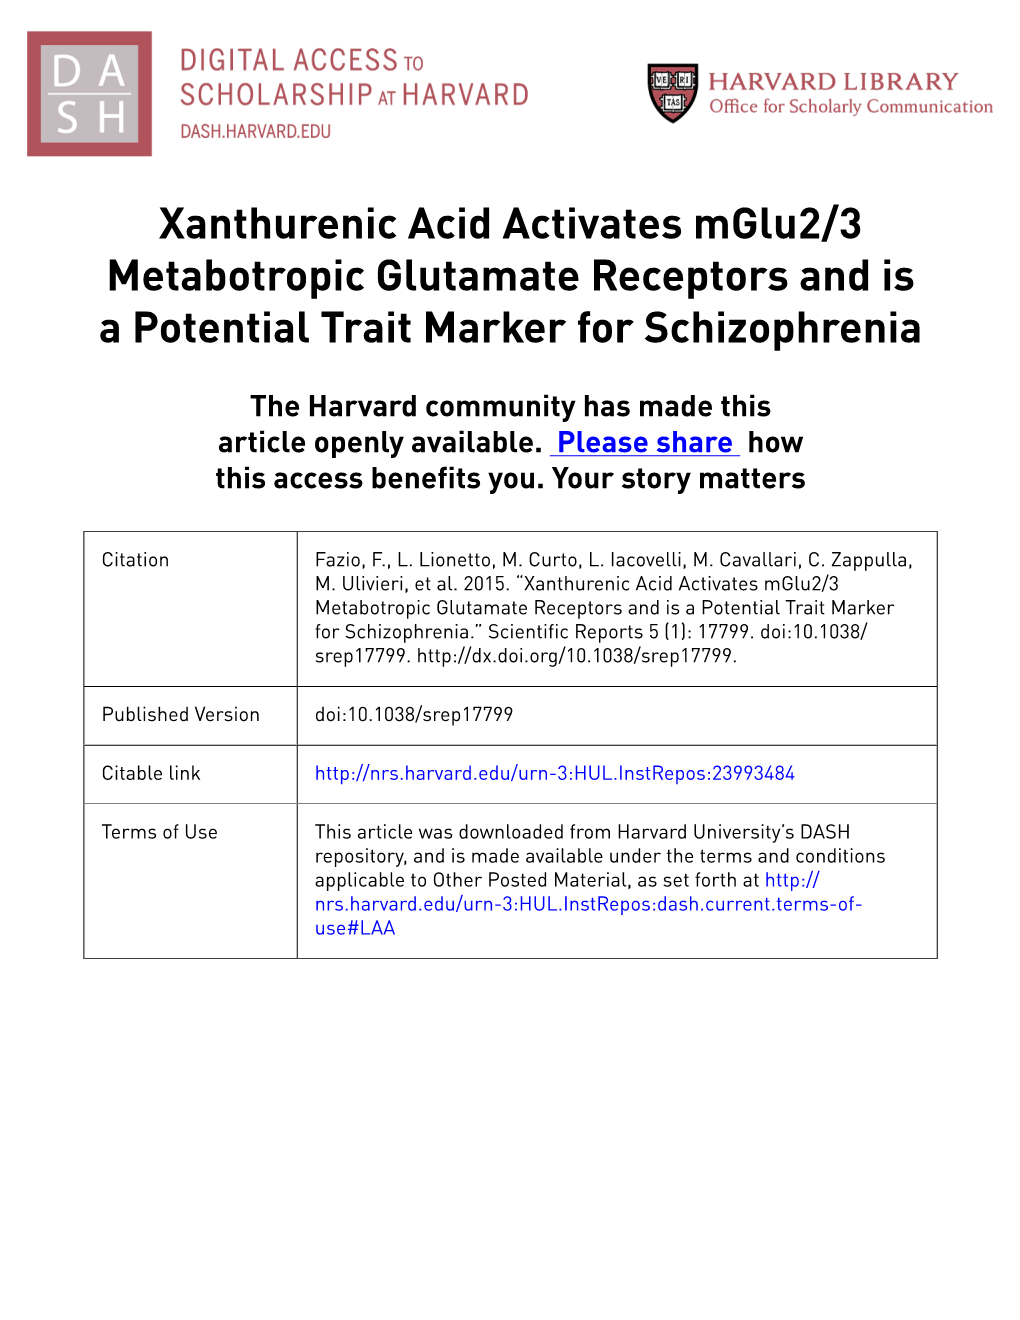 Xanthurenic Acid Activates Mglu2/3 Metabotropic Glutamate Receptors and Is a Potential Trait Marker for Schizophrenia